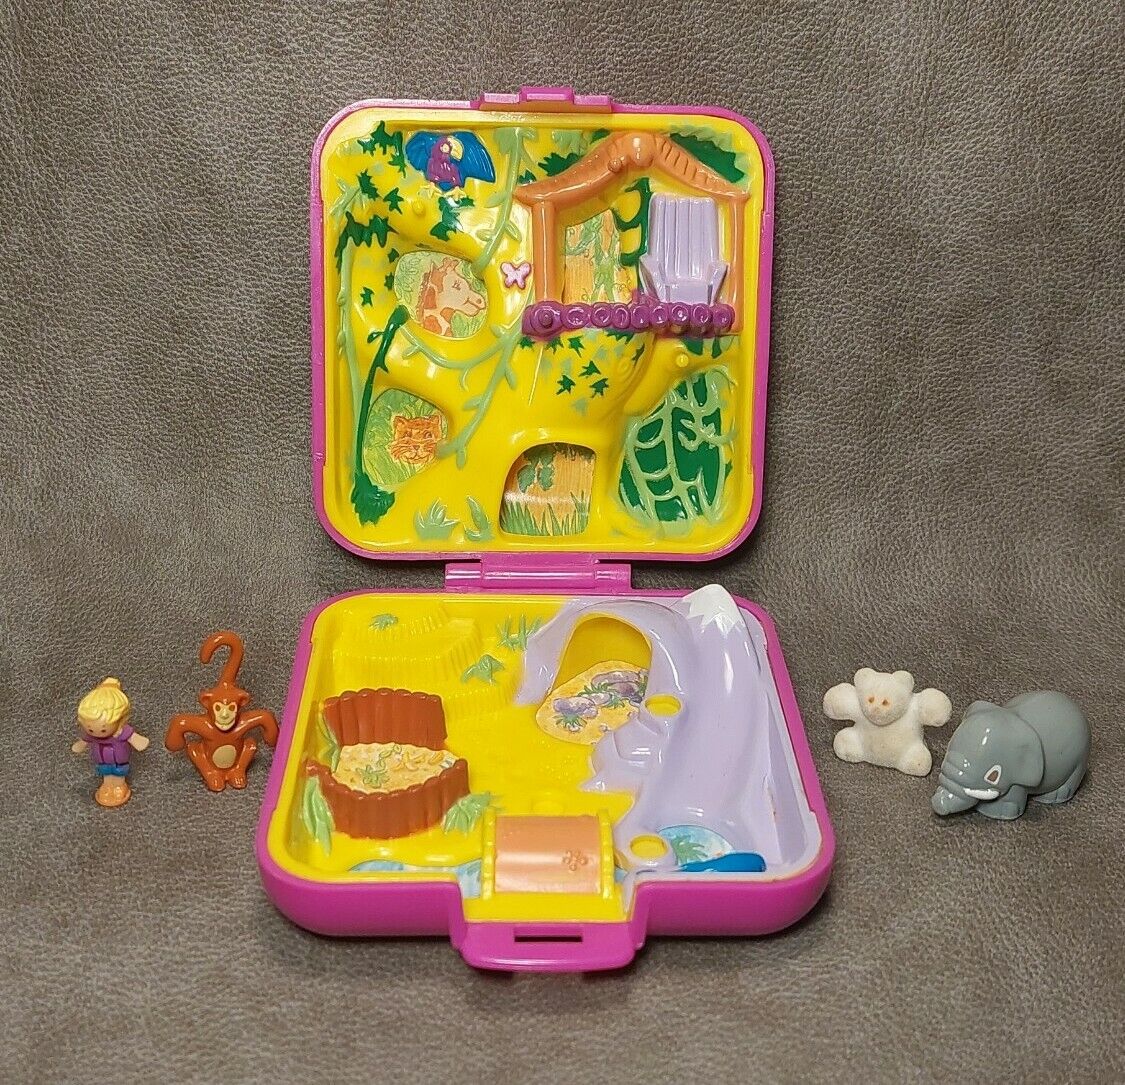 Vintage 1989 Bluebird Polly Pocket Wild Zoo Square Compact + Fig